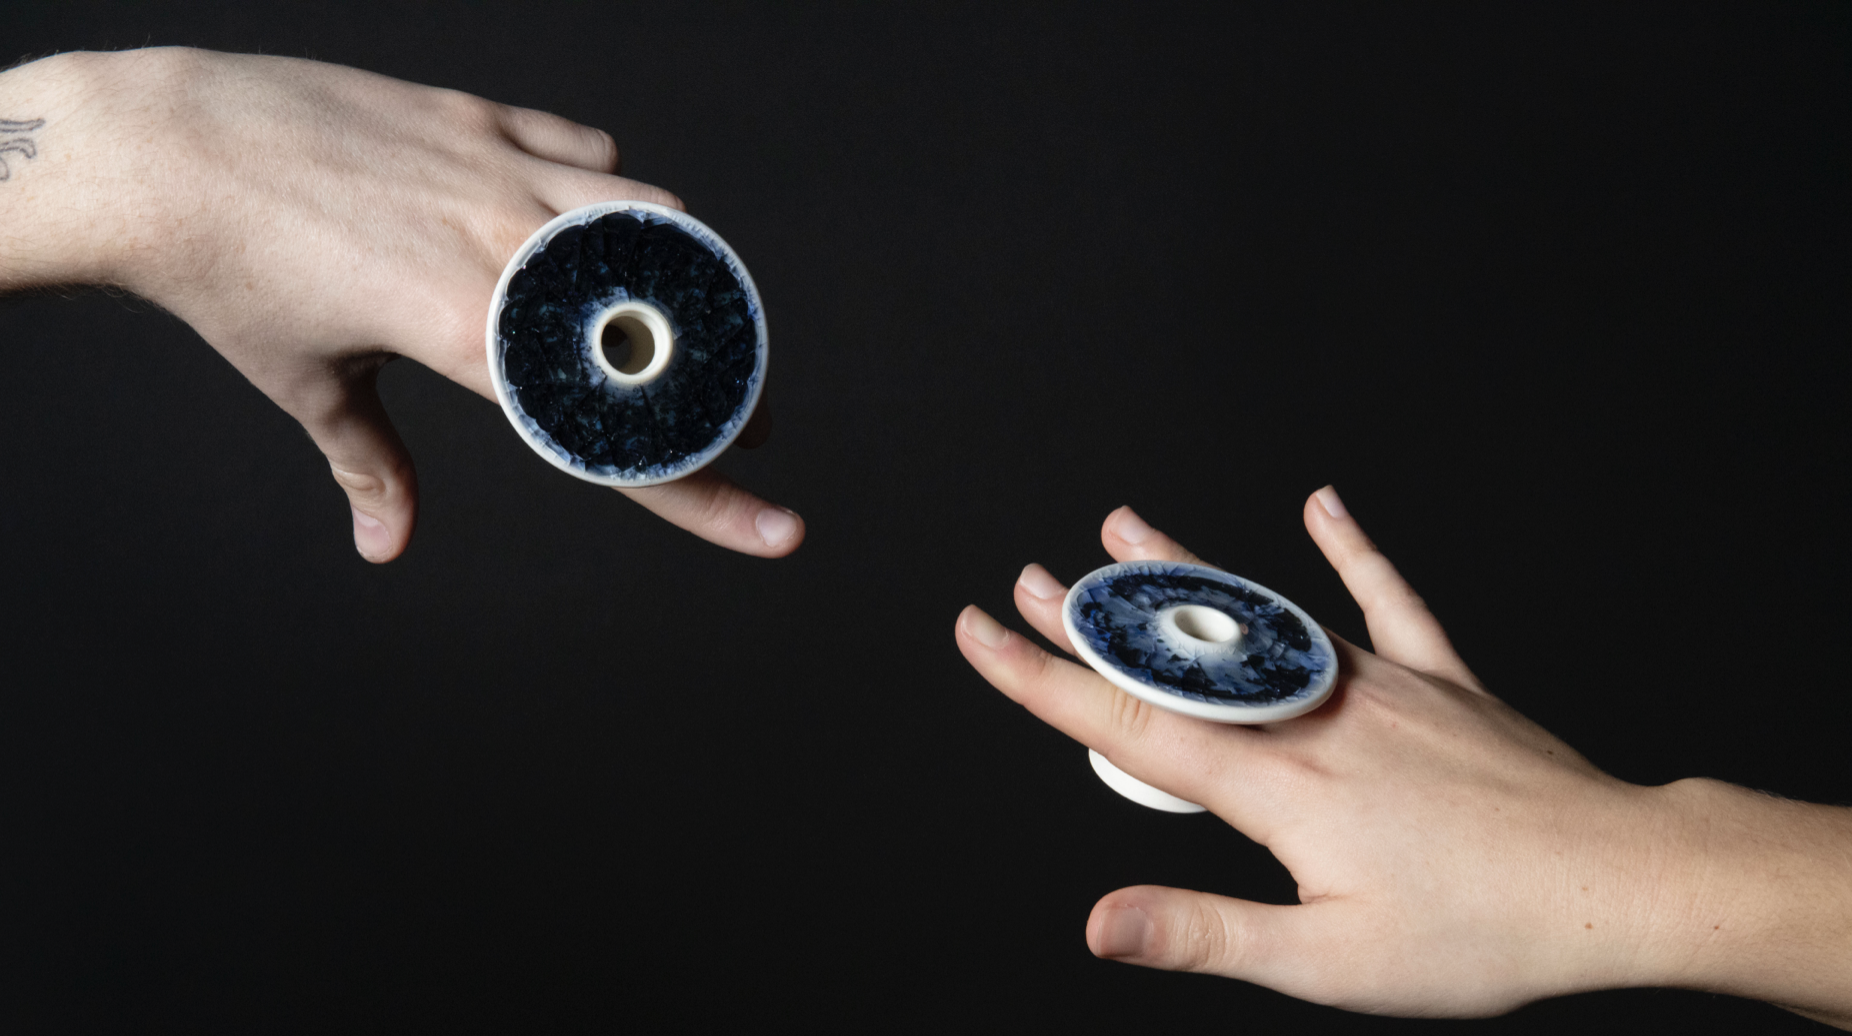 Two hand reach out from opposite ends of the image towards each other. The hands are against a deep black background and are holding a statement porcelain ring between the index and third finger. Rings by Zachary Dunlap, image by Katie Davies.